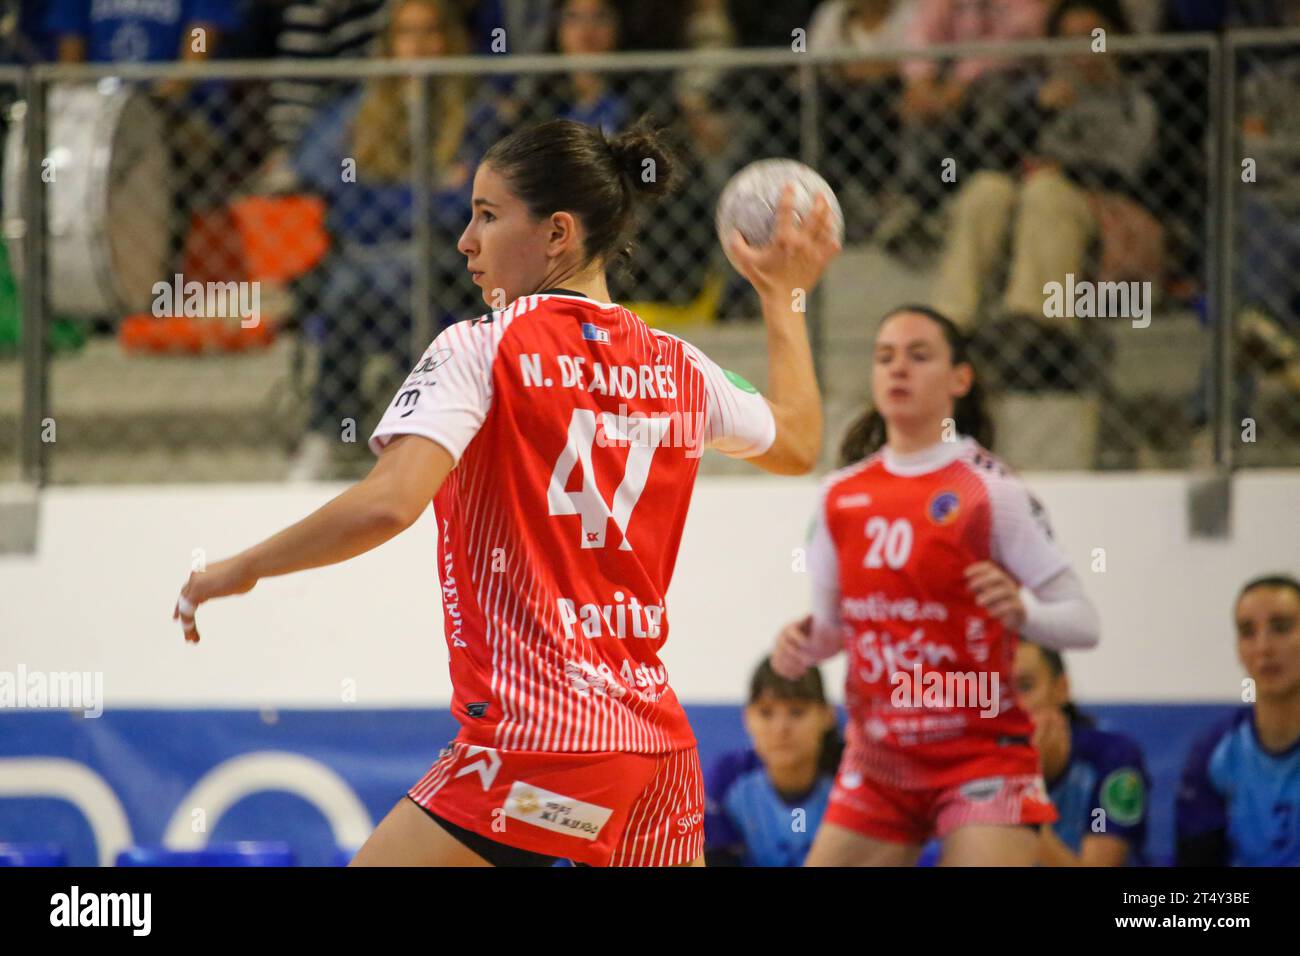 Oviedo, Spain. 1st Nov, 2023. The player of Motive.co Gijon Balonmano La Calzada, Nayla de Andres (47) with the ball during the 9th Matchday of the Liga Guerreras Iberdrola between Lobas Global Atac Oviedo and Motive.co Gijon La Calzada Handball, on November 1, 2023, at the Florida Arena Municipal Sports Center, in Oviedo, Spain. (Photo by Alberto Brevers/Pacific Press) Credit: Pacific Press Media Production Corp./Alamy Live News Stock Photo